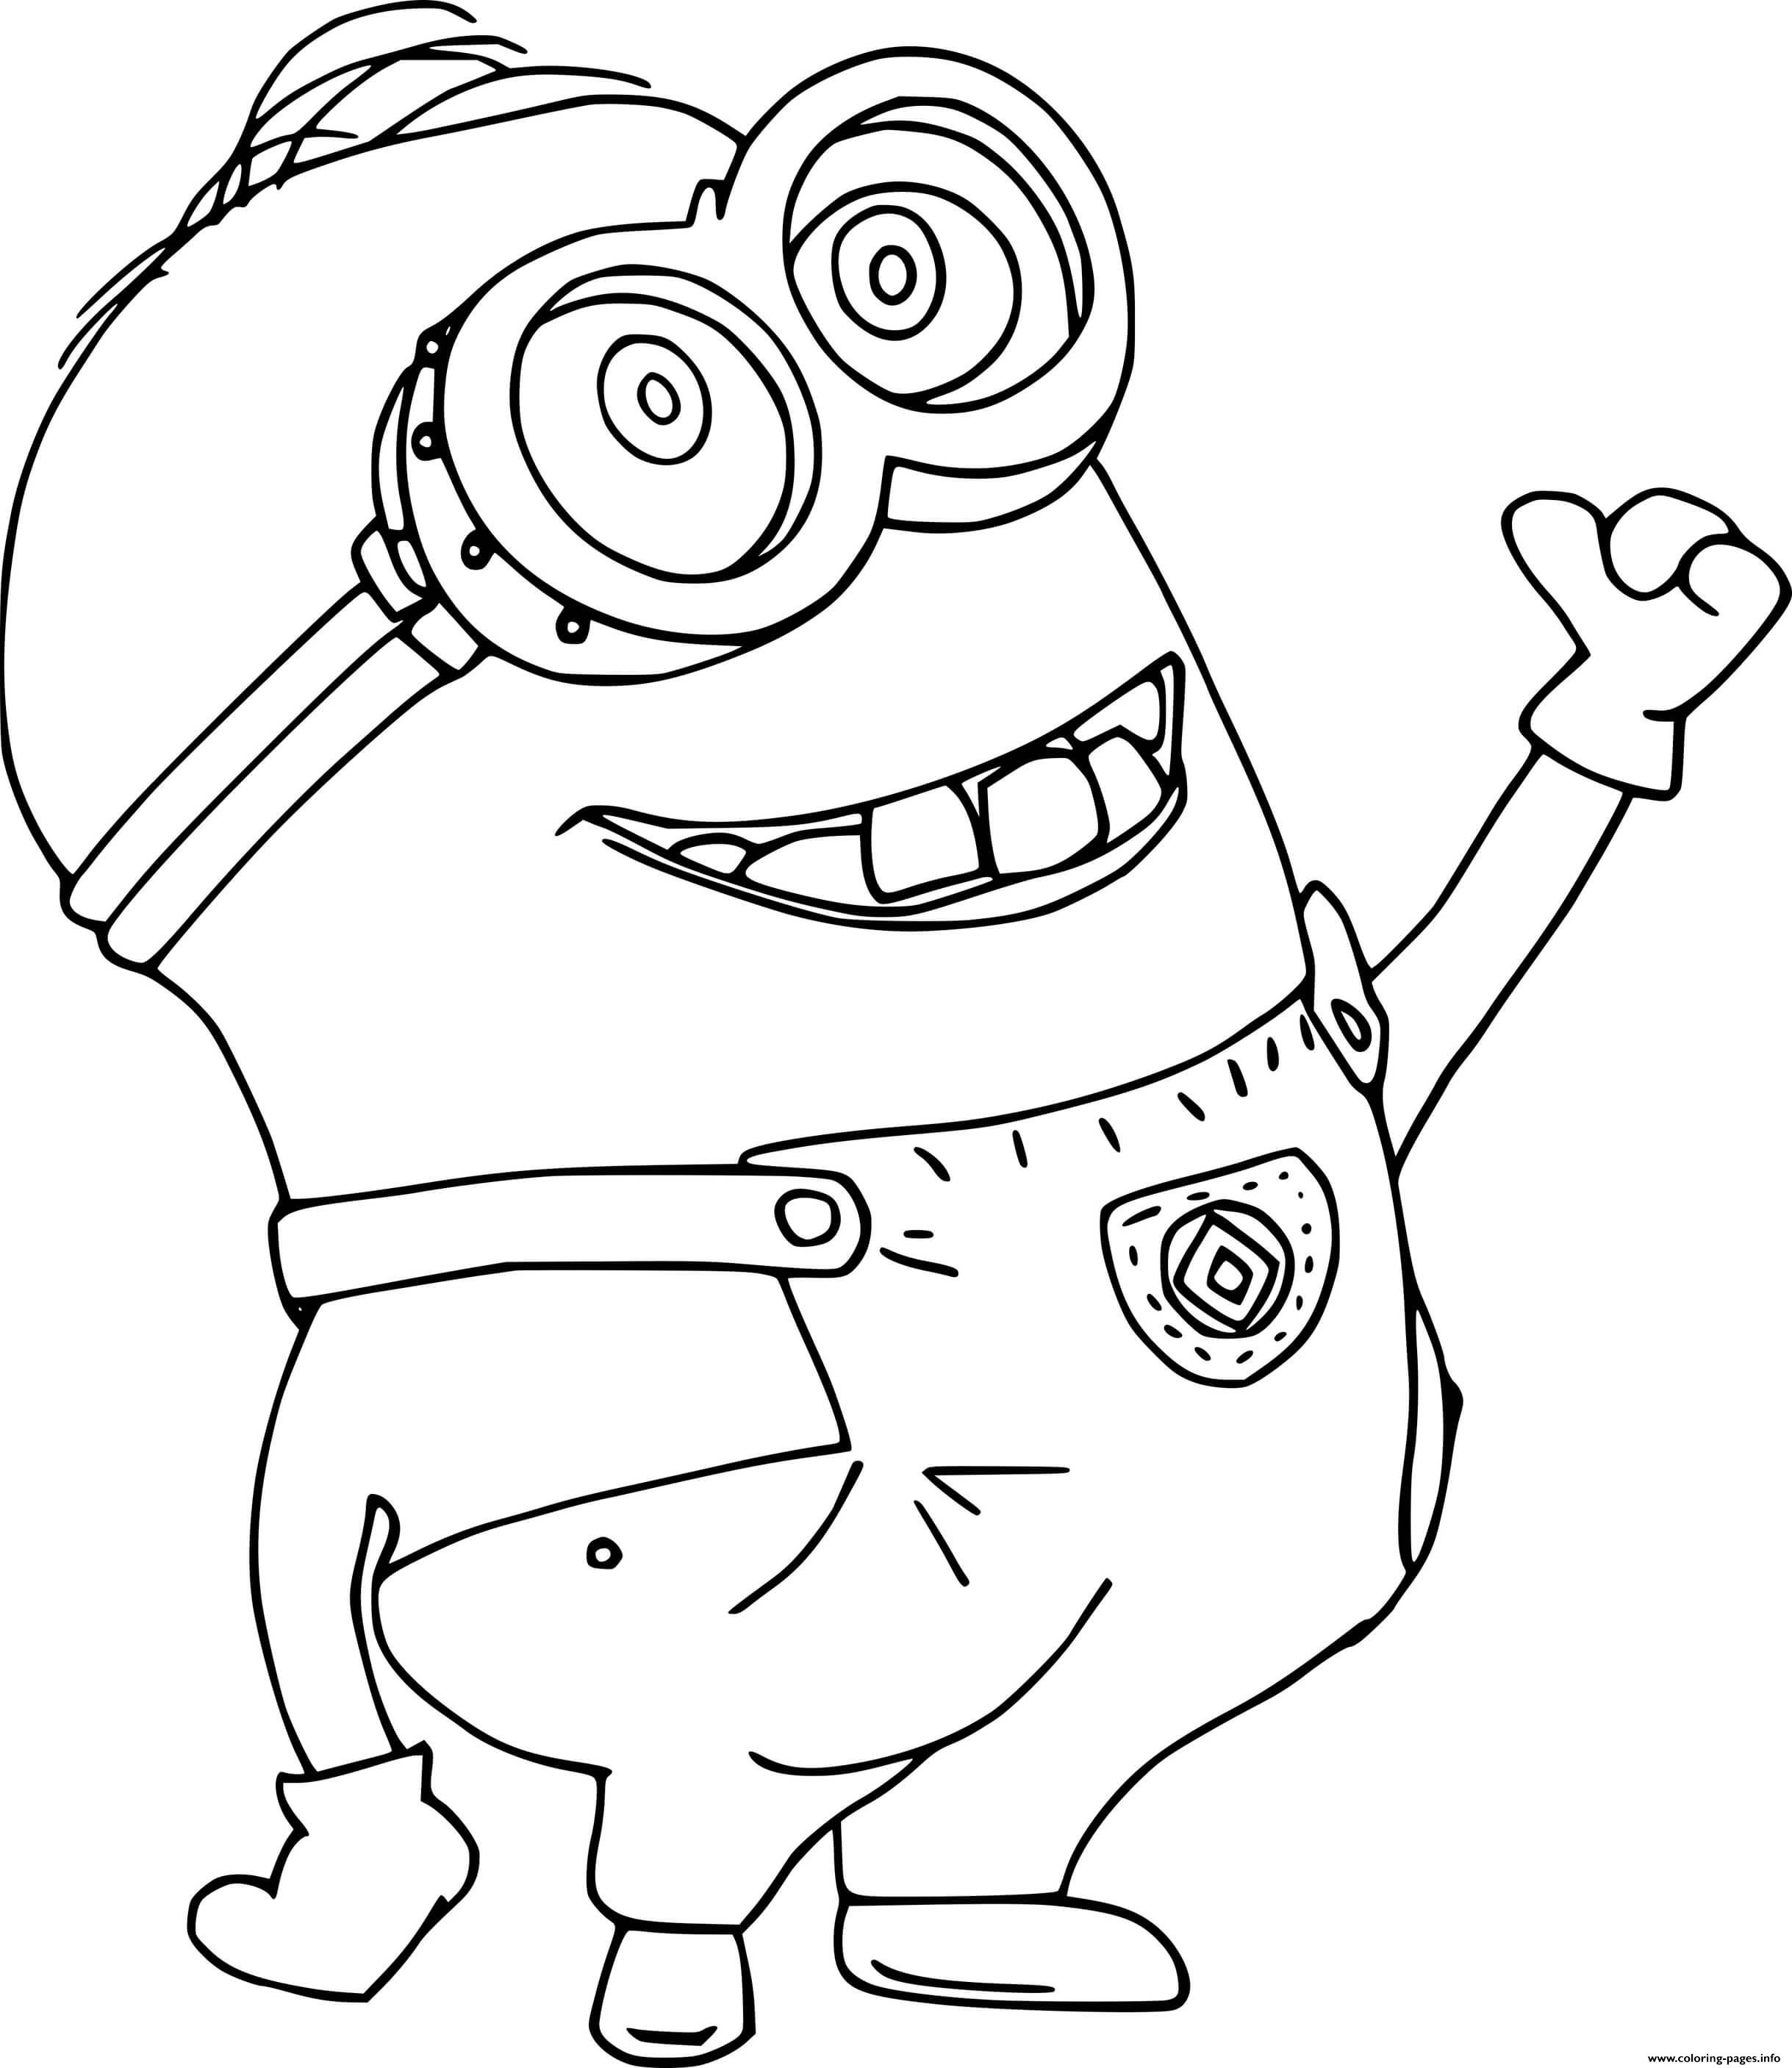 Minion Is Happy coloring